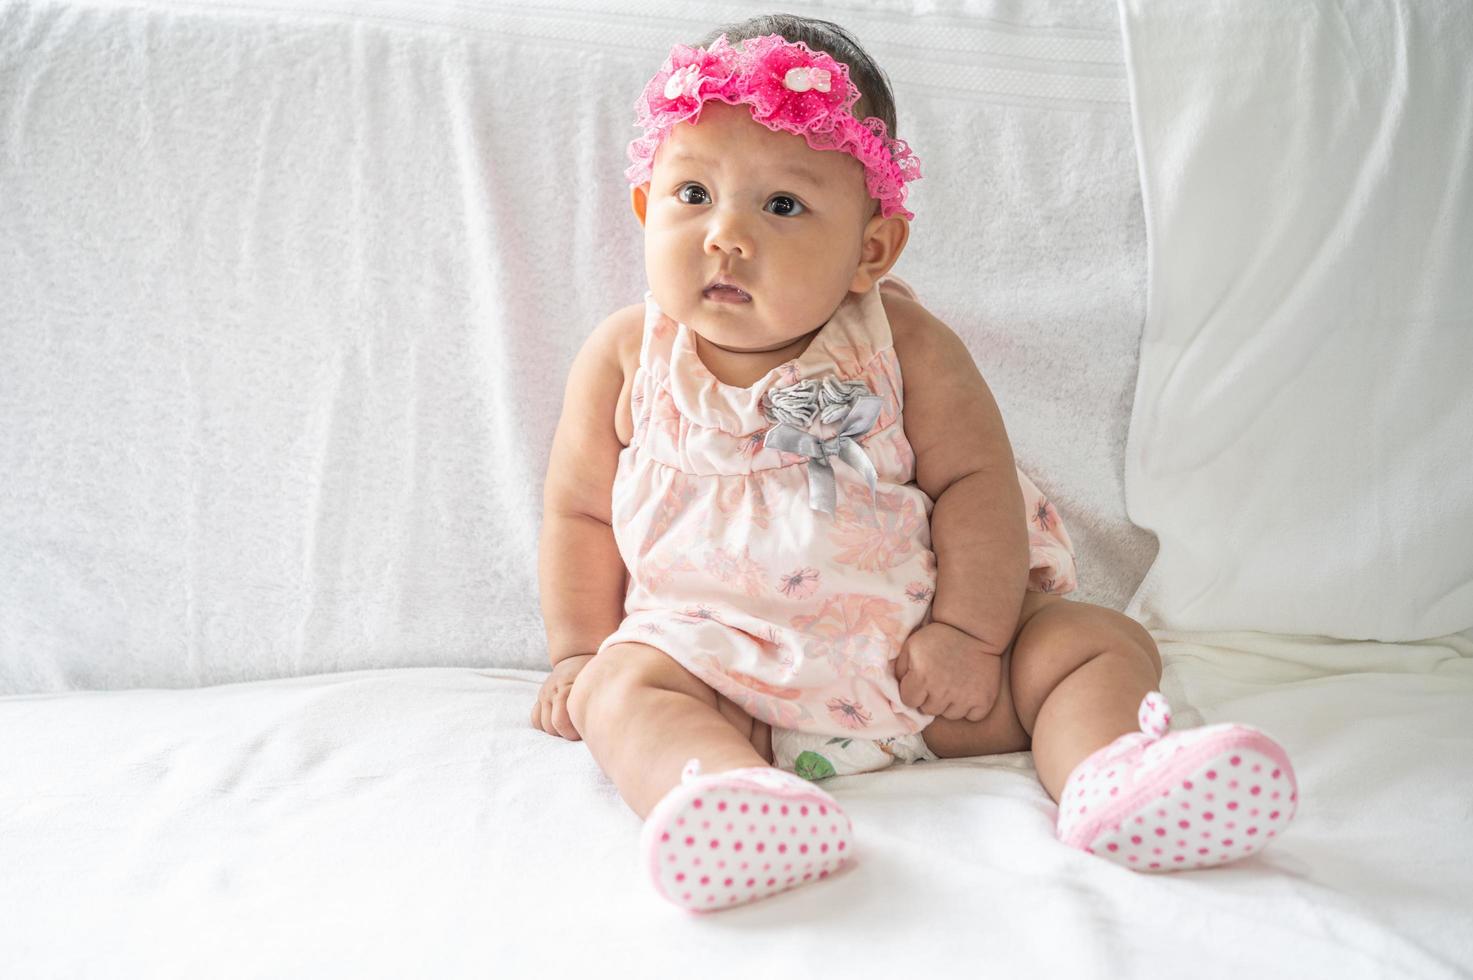 A baby learning to sit on a white bed photo